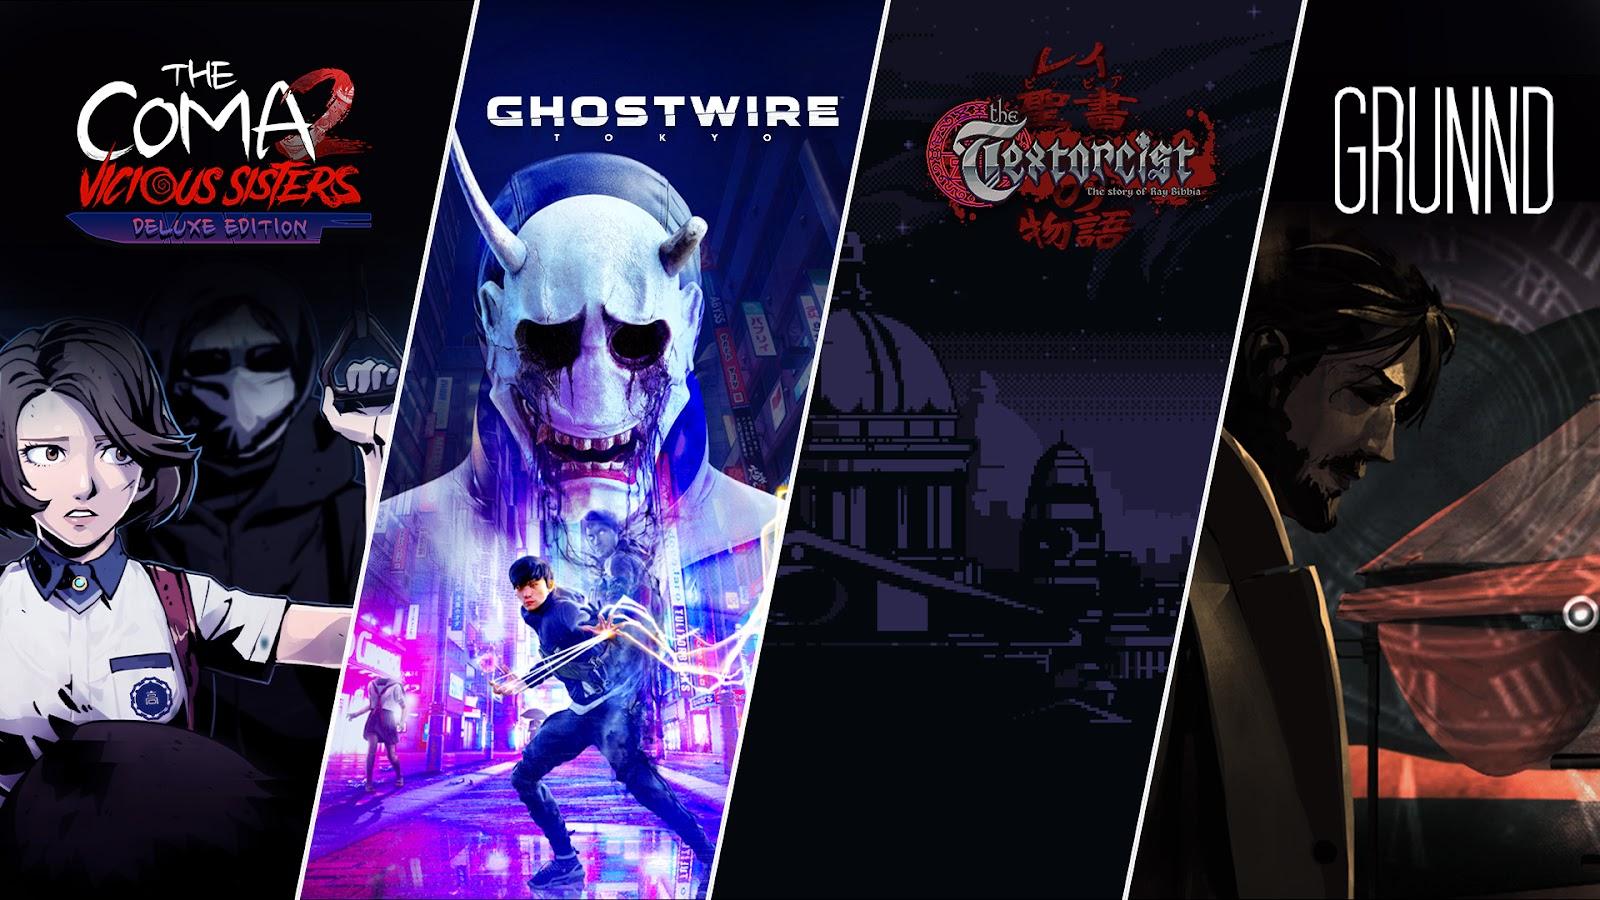 Kick off the Fall Season with New Free Games and Content on Prime